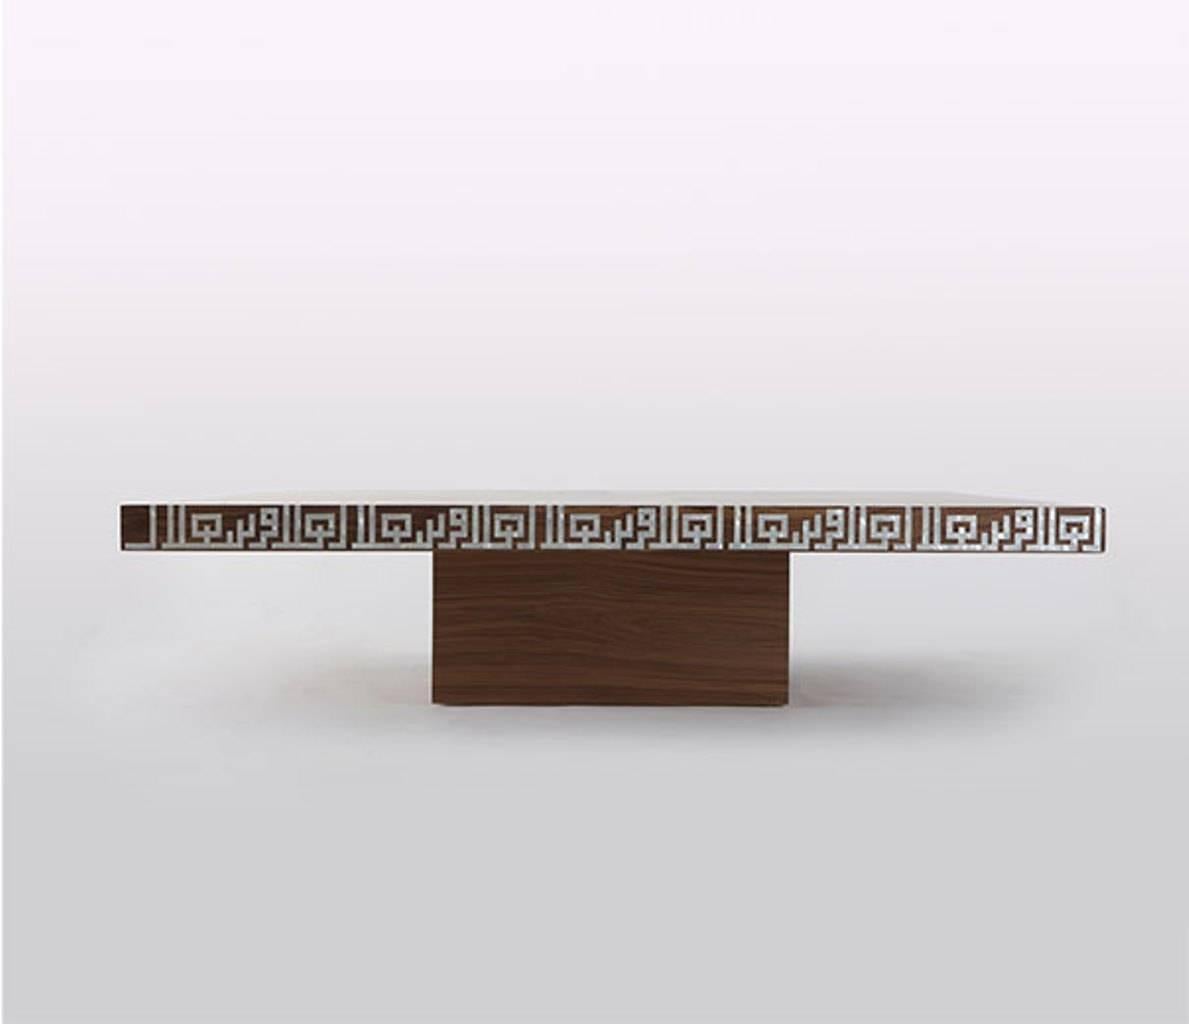 Contemporary square coffee table in brown American walnut finish and mother-of-pearl inlay. The design of this table focuses on eastern patterns and geometry. The type is directly inspired from the diamond Arabic dot shape as well as the geometric